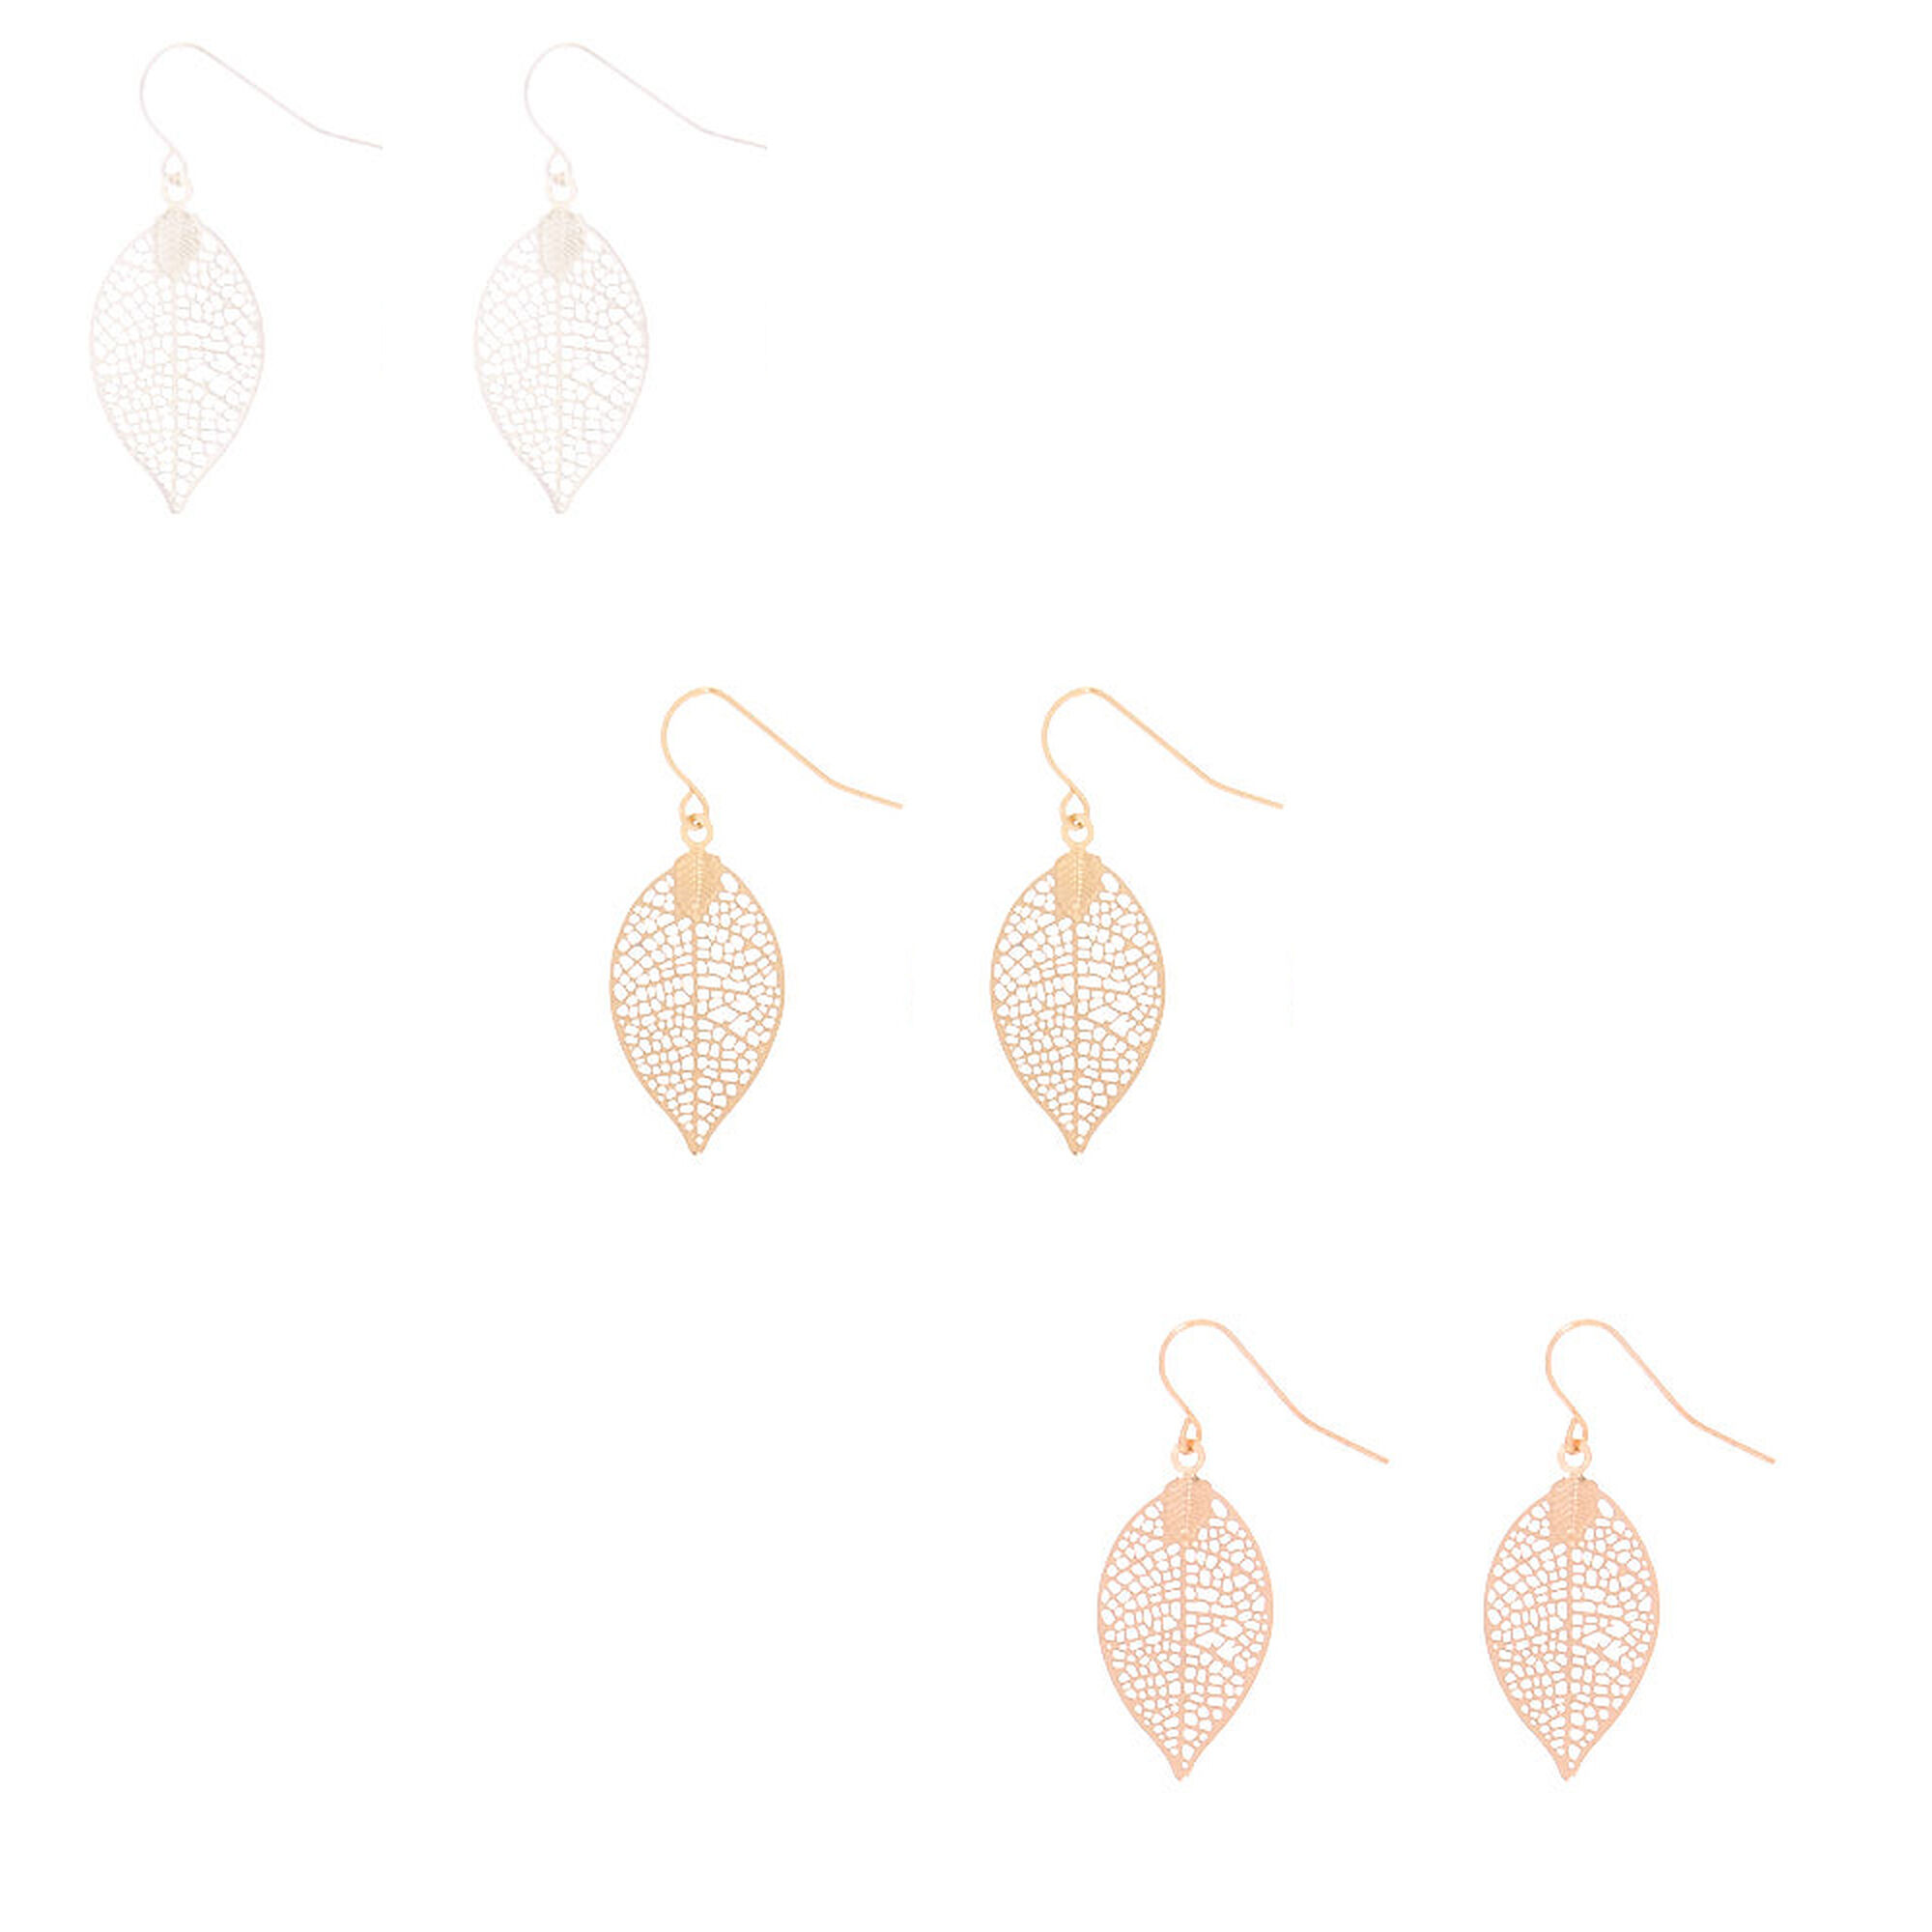 View Claires Mixed Metal 1 Filigree Leaf Drop Earrings 3 Pack Rose Gold information